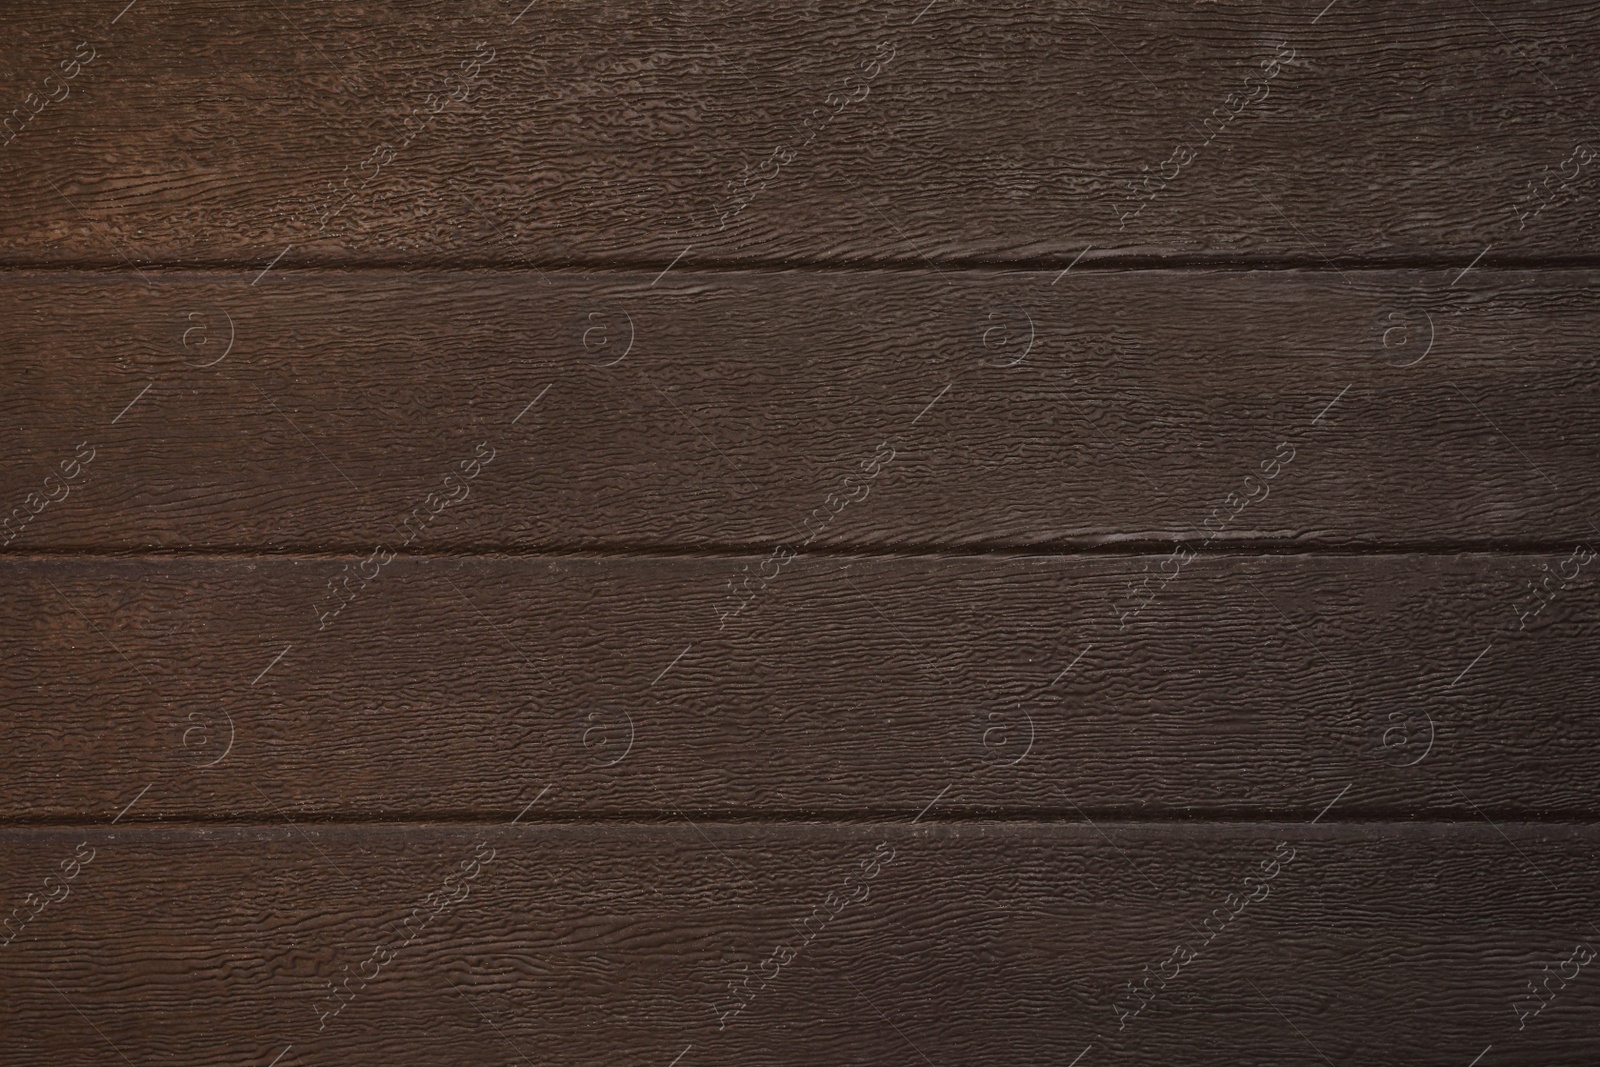 Photo of Texture of dark brown wooden surface as background